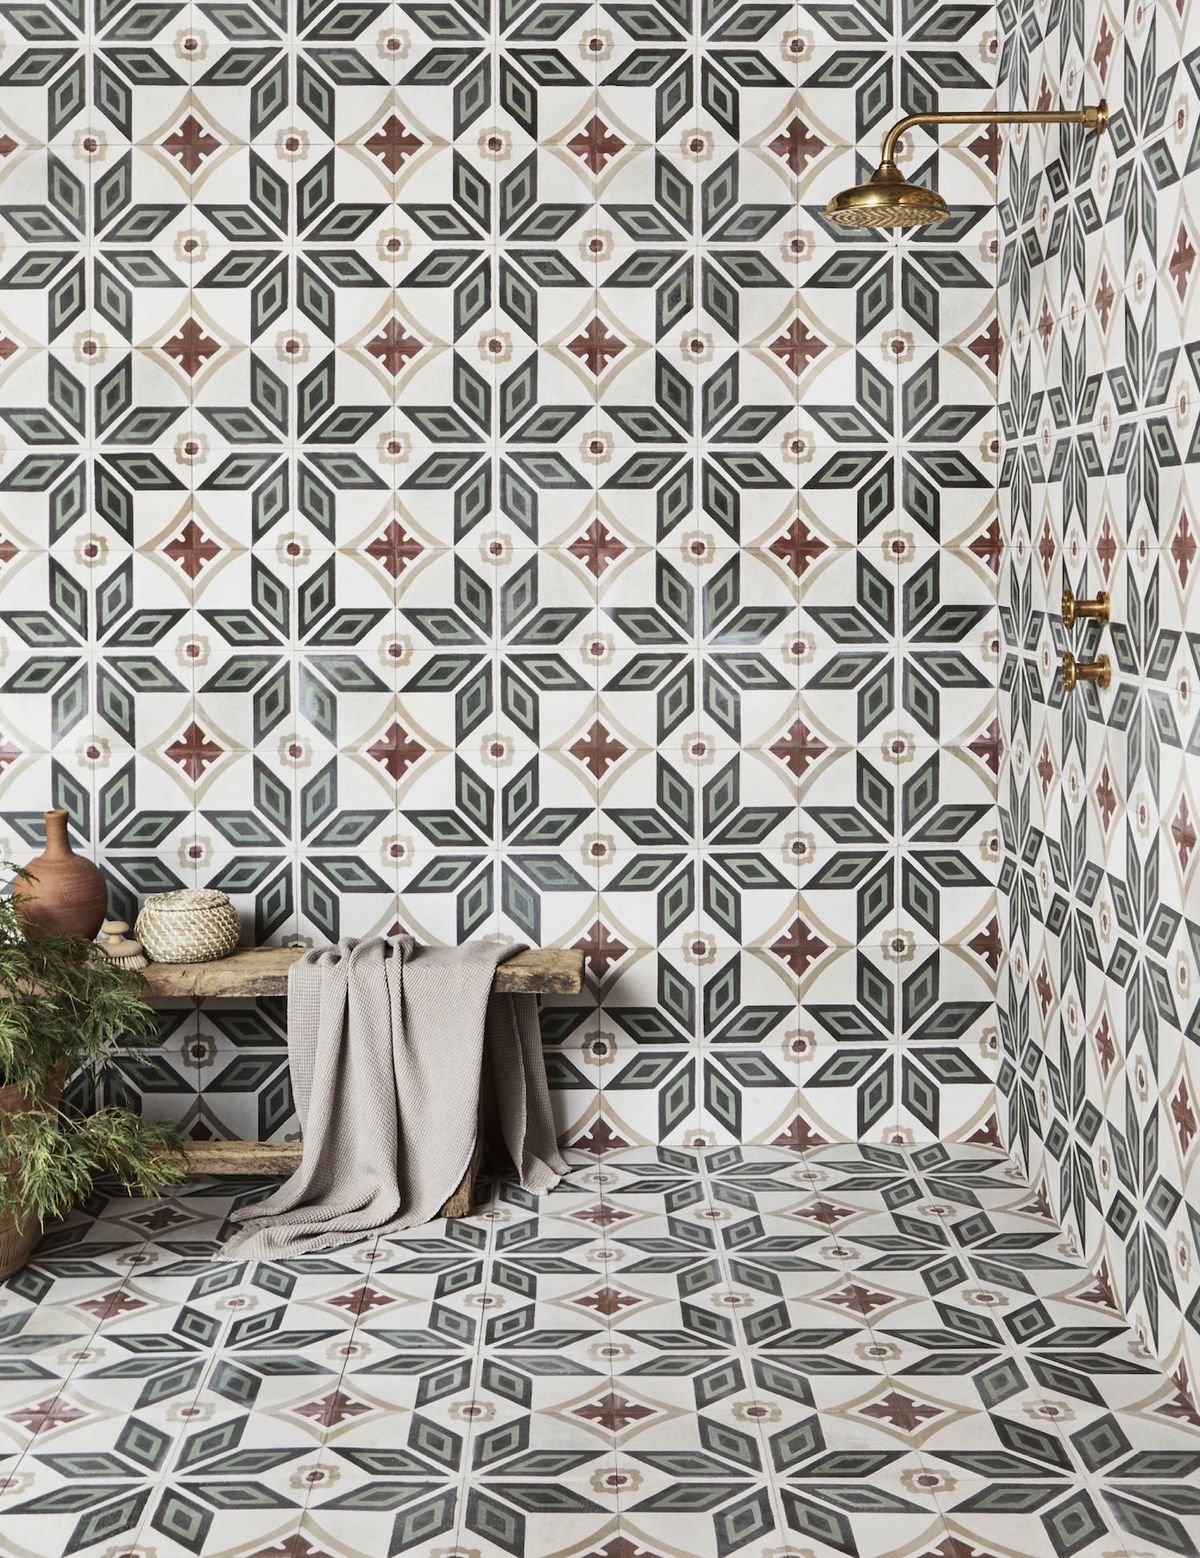 How to tile a bathroom – everything you need to know